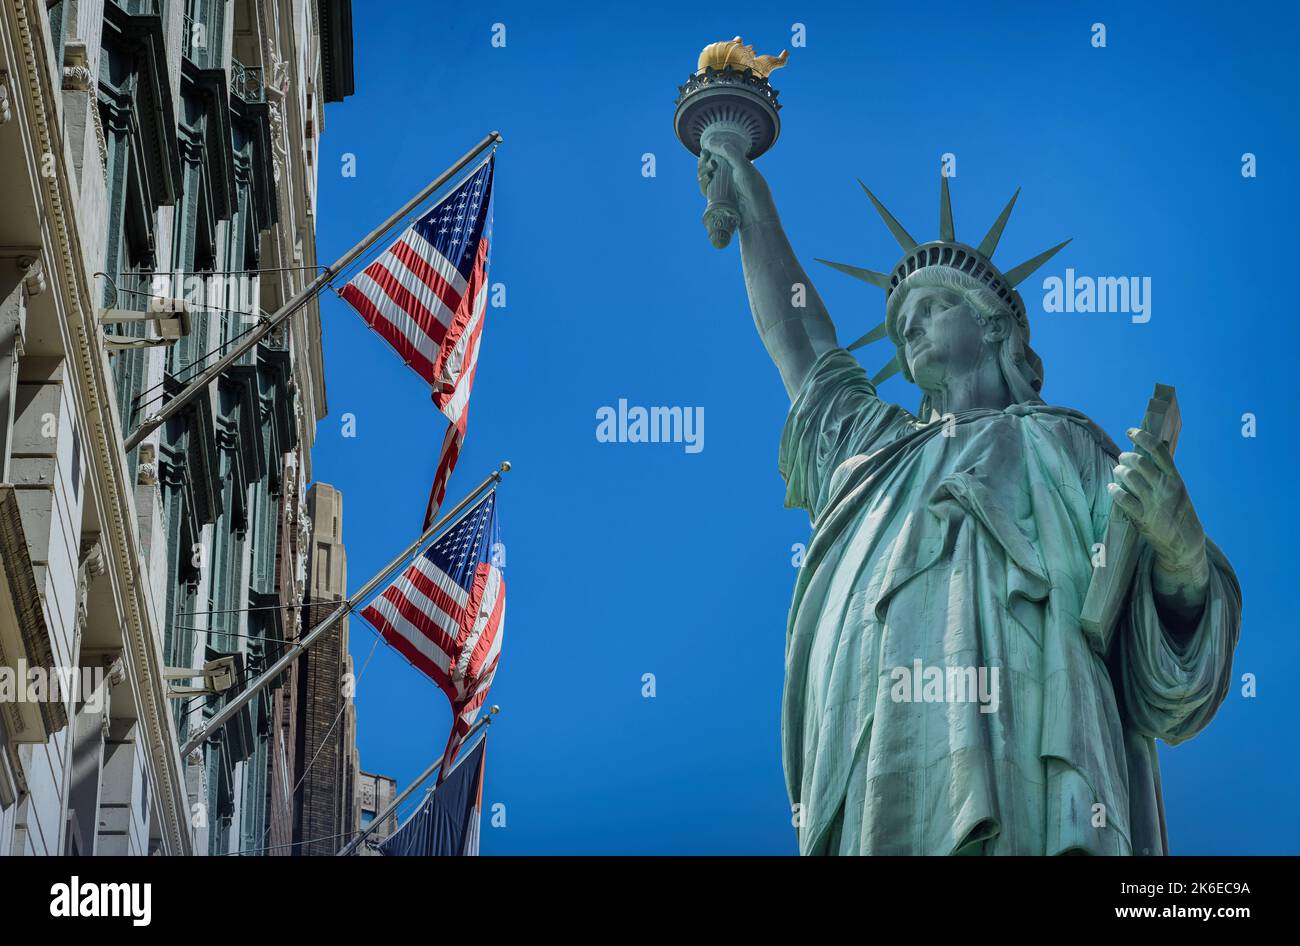 View Statue of Liberty near US building in flying flag United States America Stock Photo